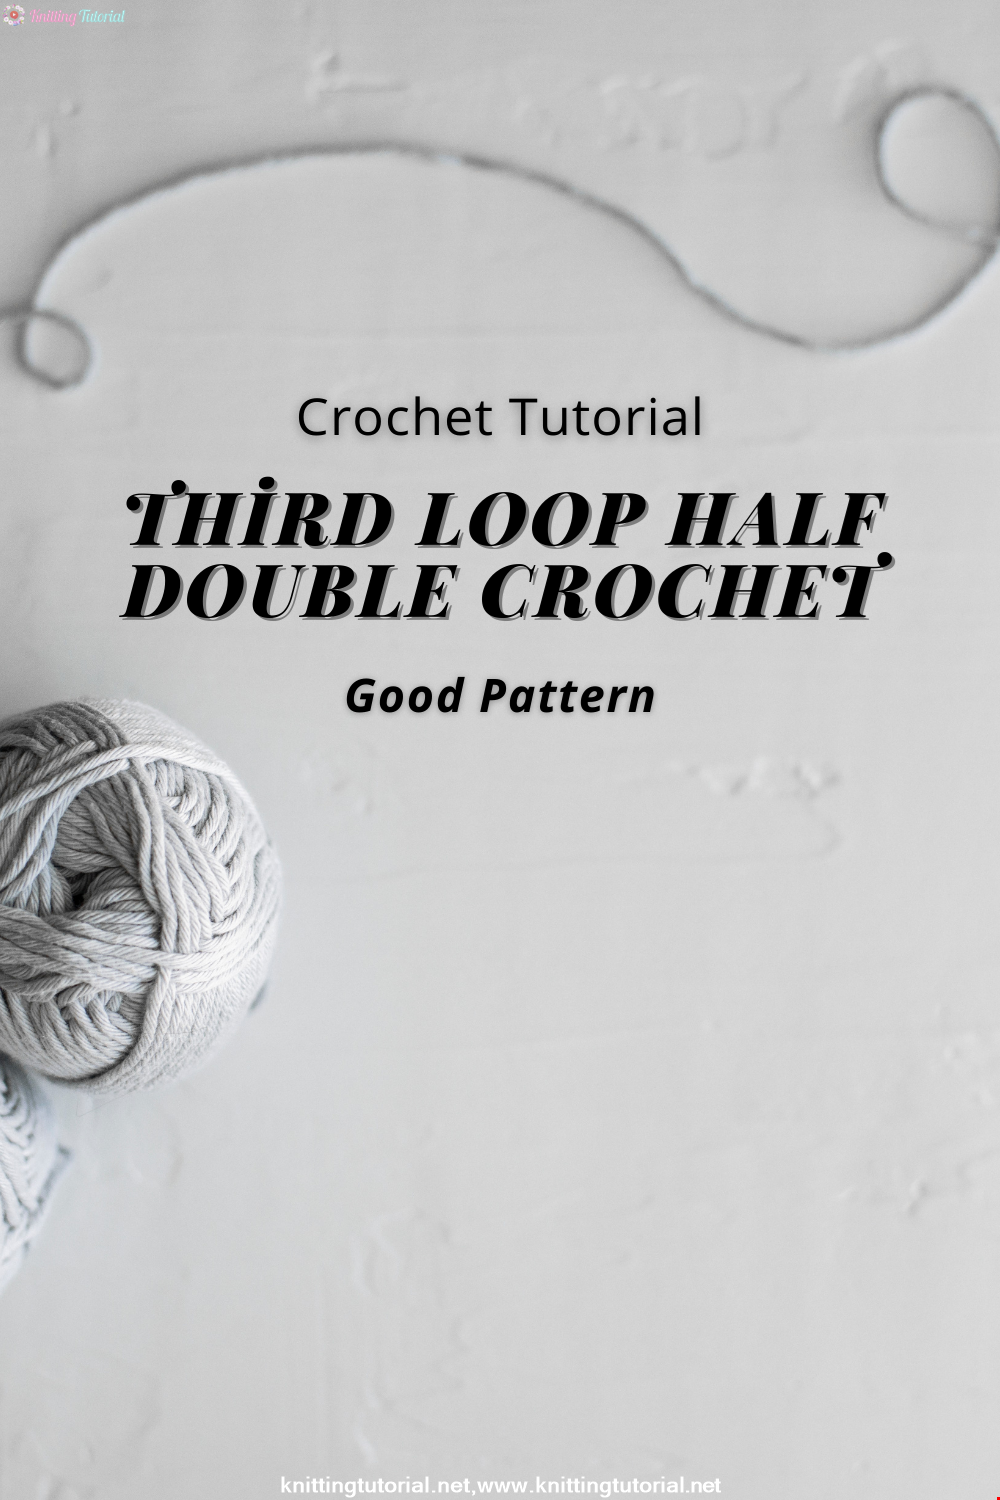 Crochet Tutorial and Pattern <3